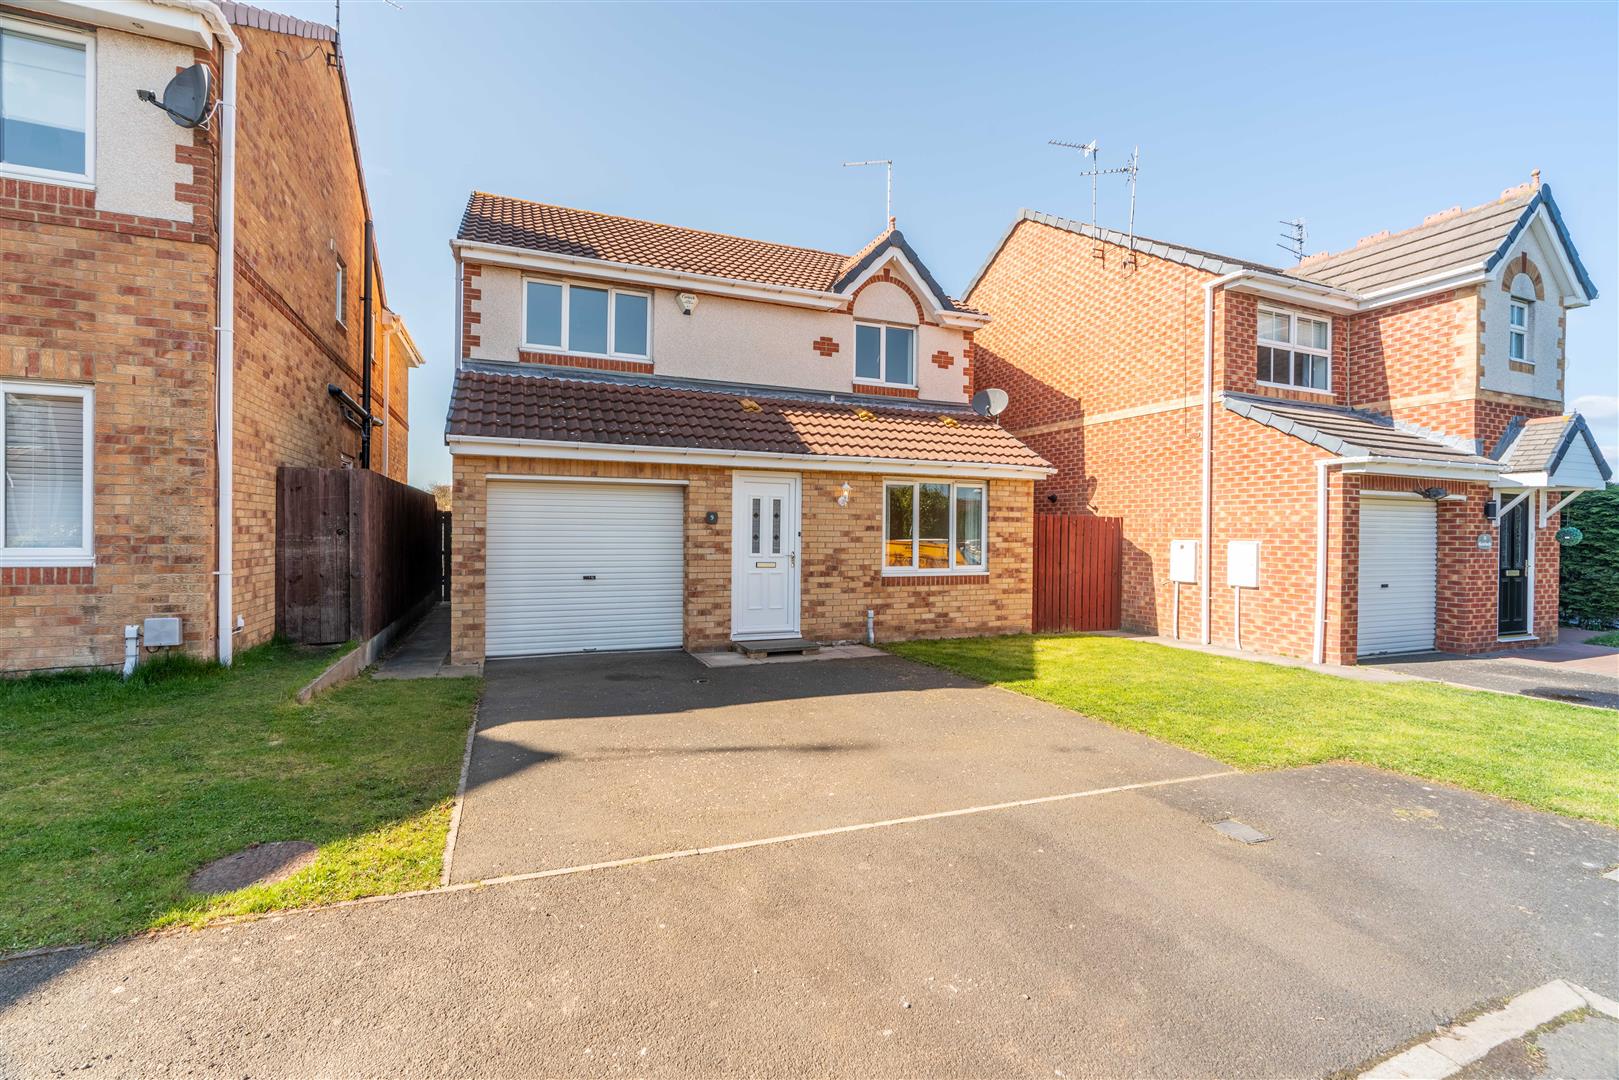 3 bed detached house for sale in Gairloch Close, Cramlington - Property Image 1